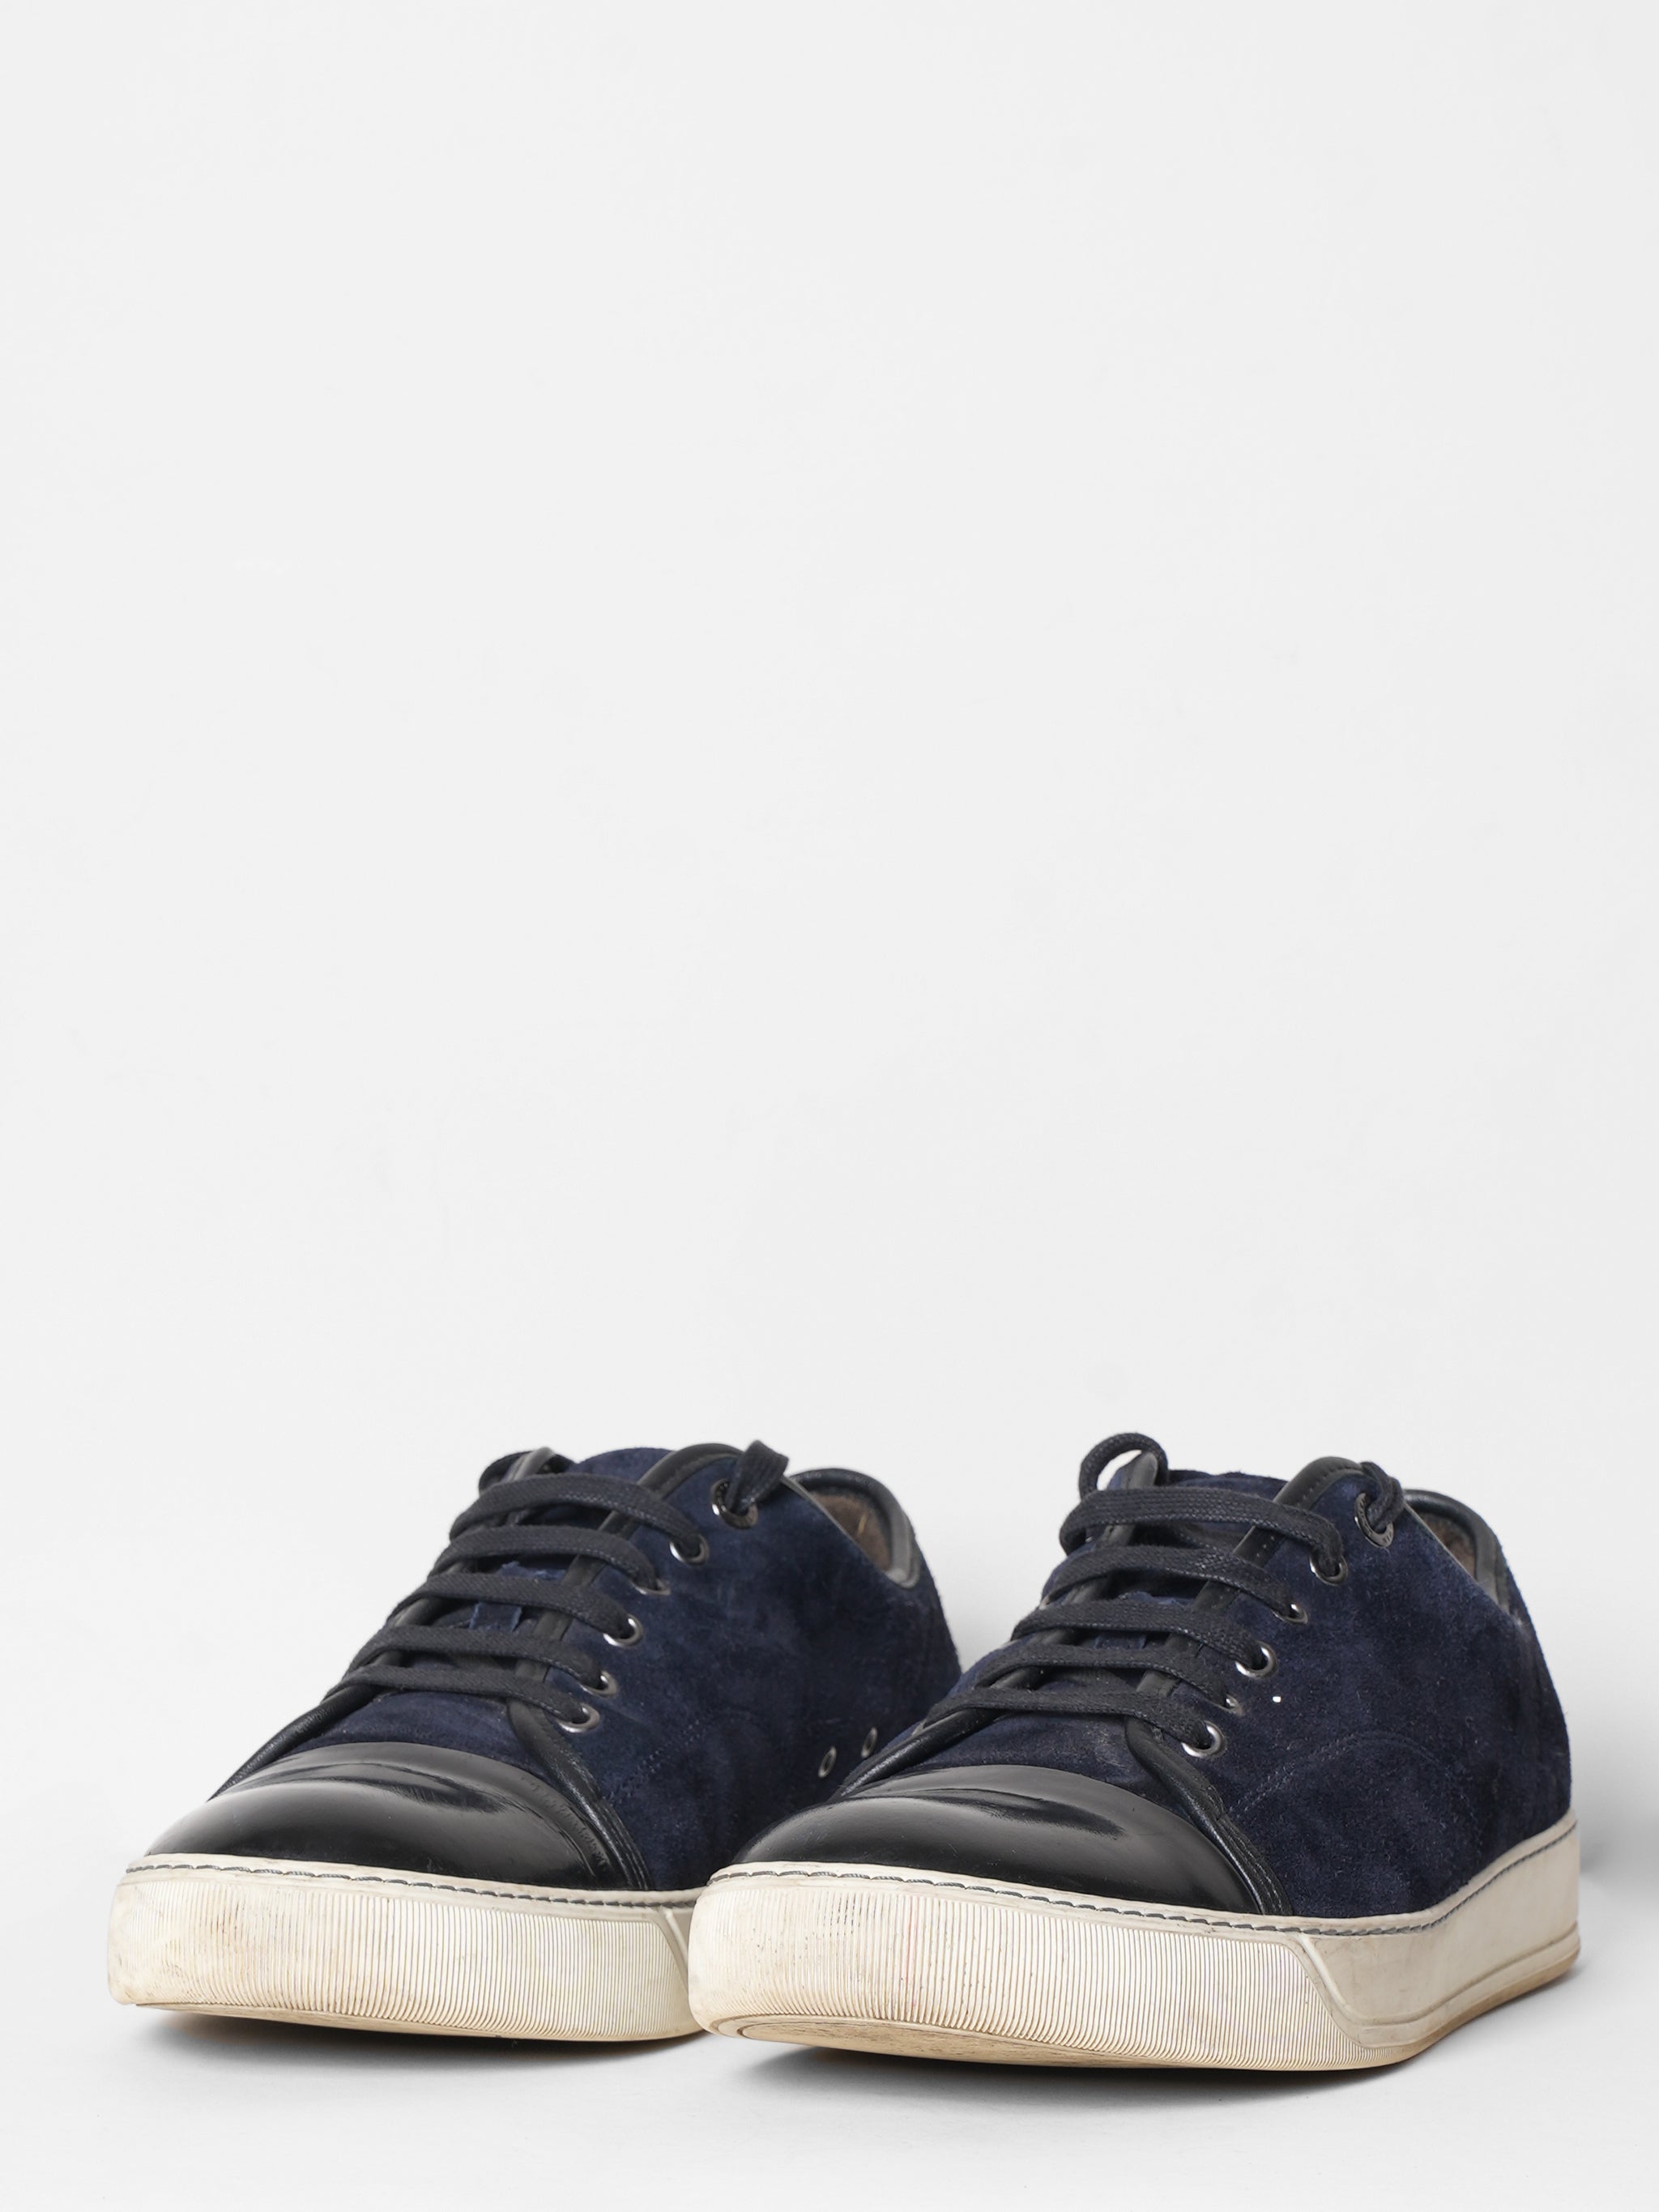 Lanvin Suede Lace Up Sneakers